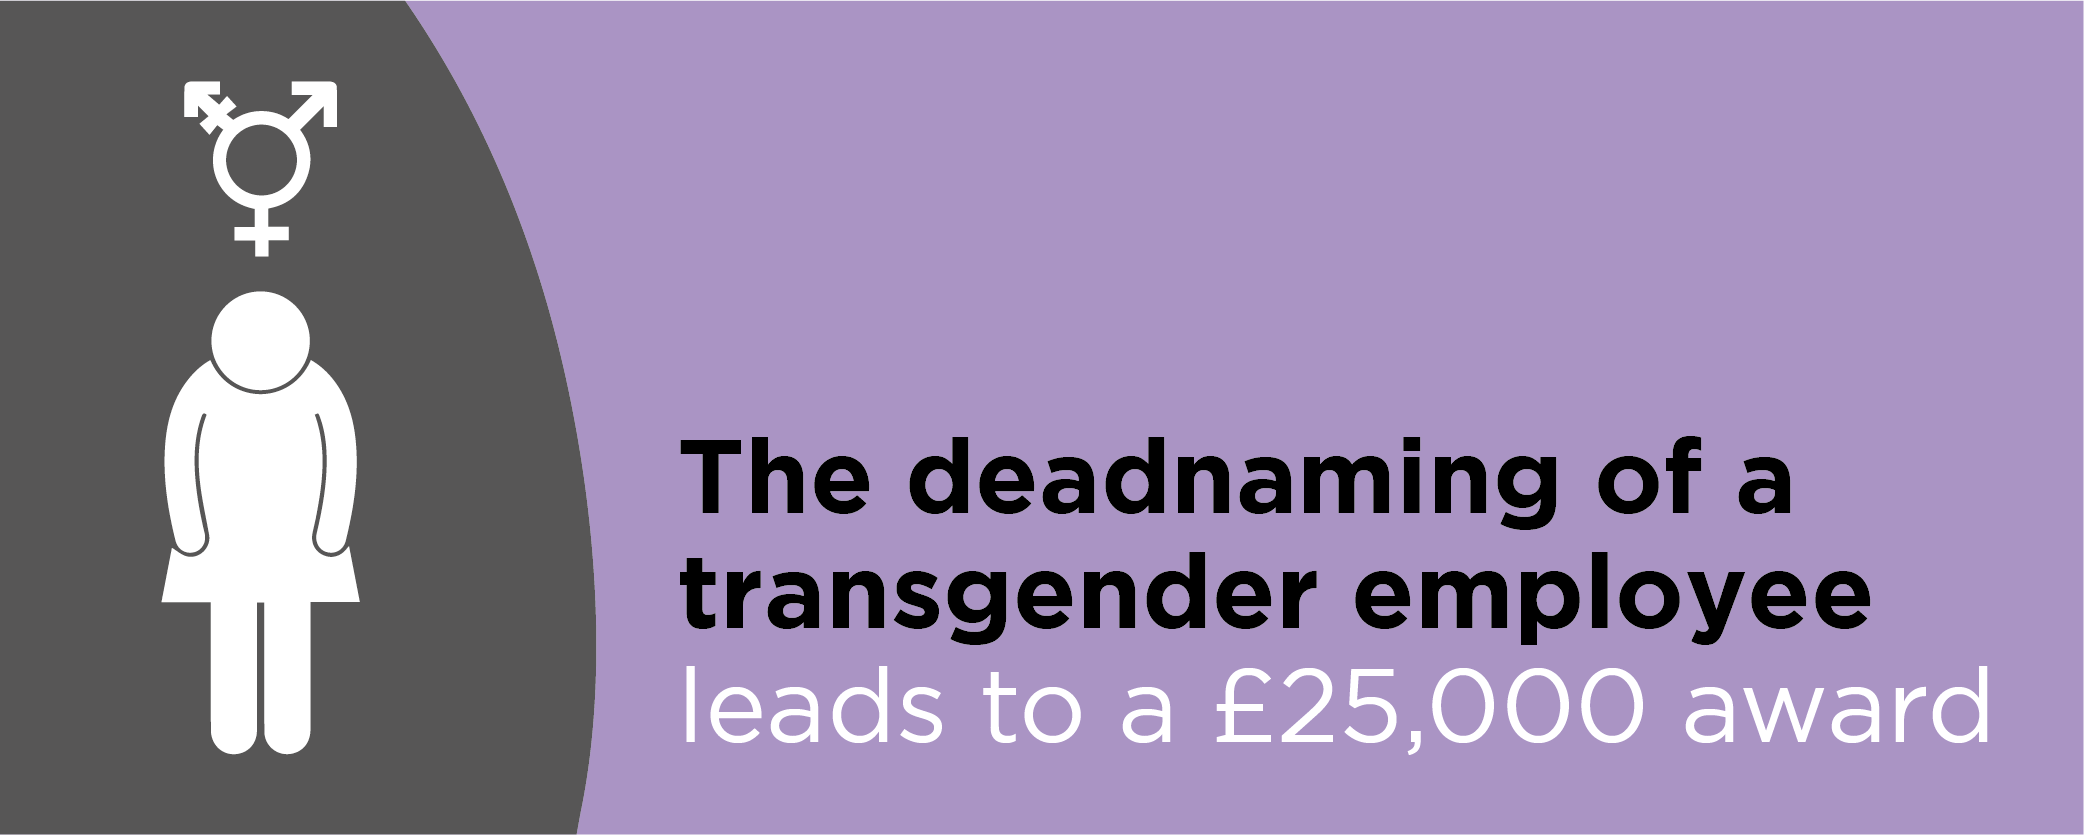 The deadnaming of a transgender employee leads to a GBP25,000 award